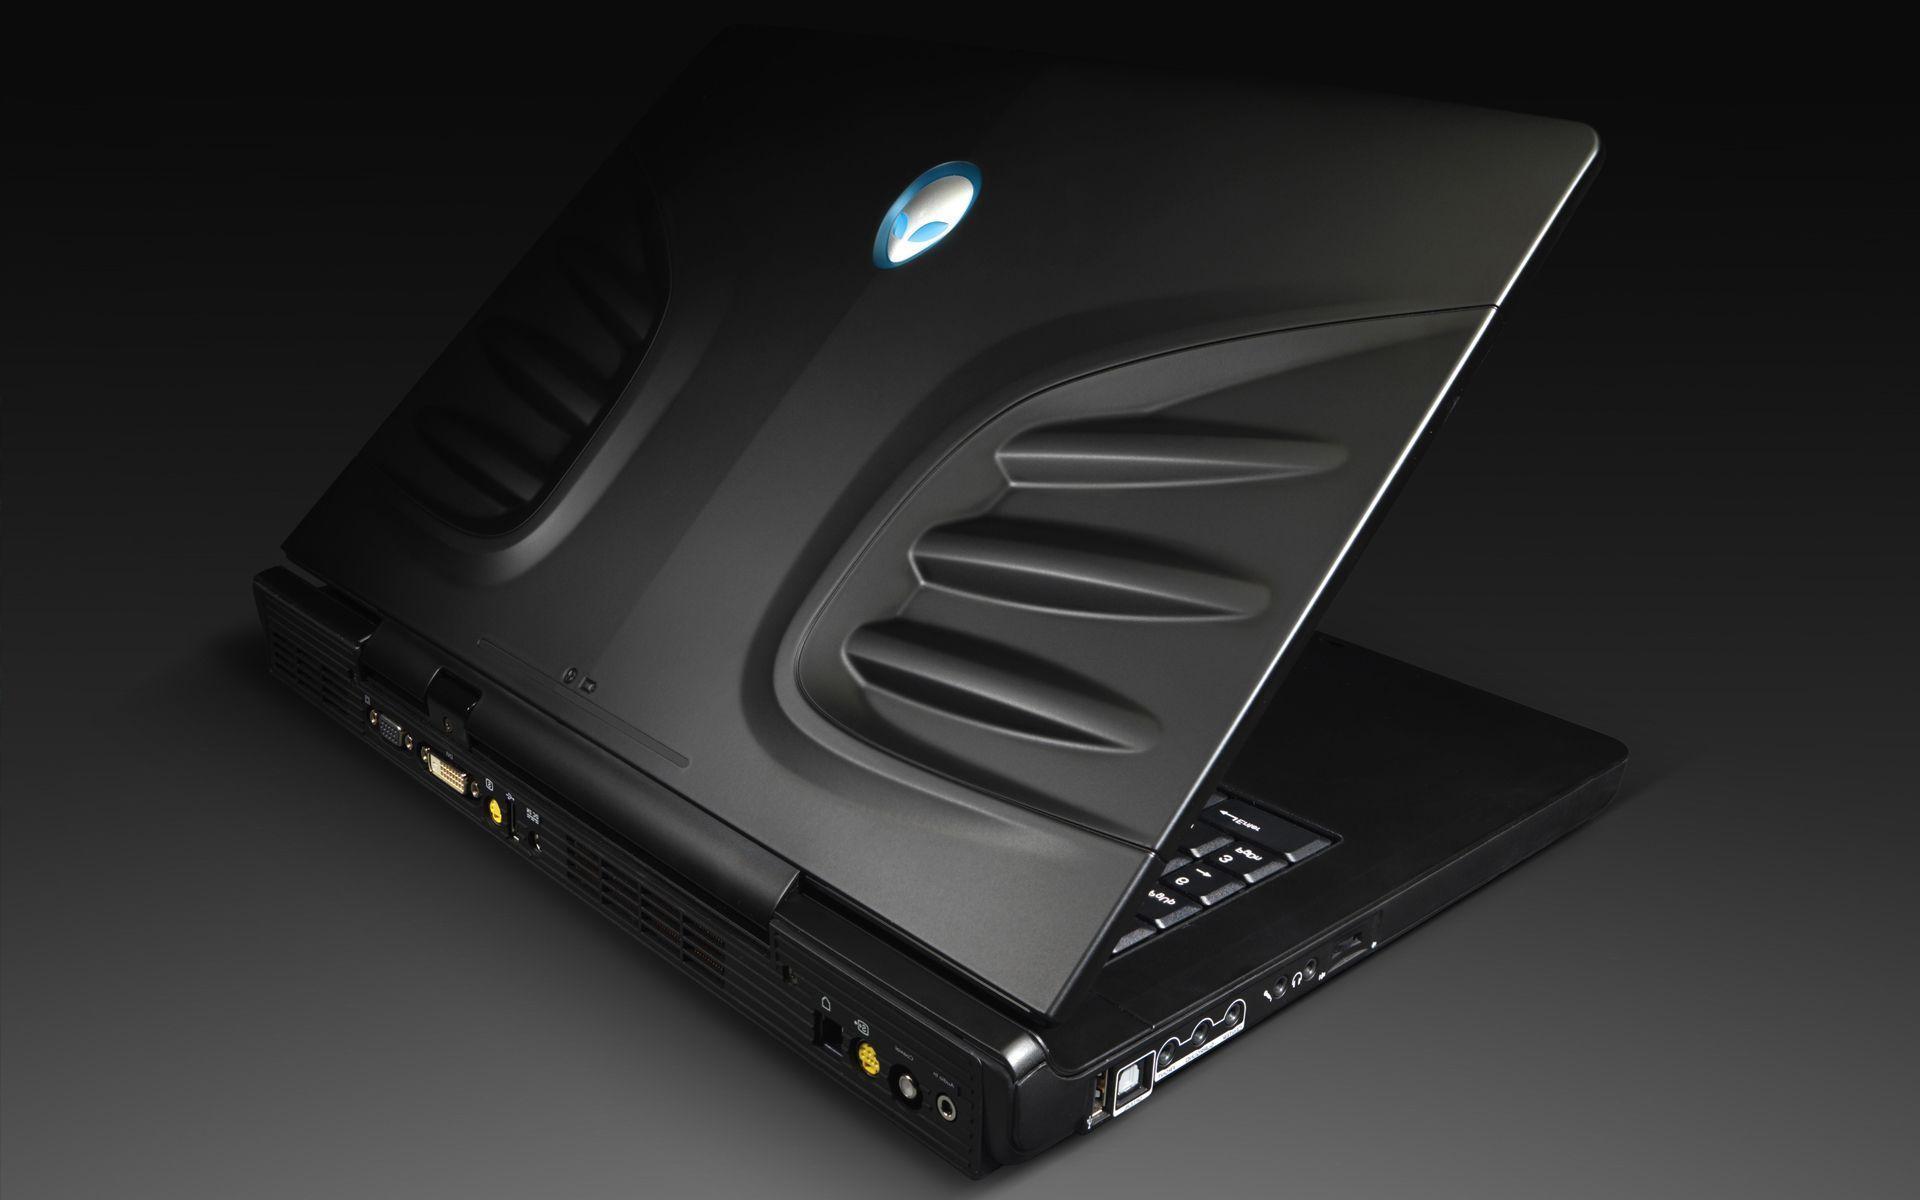 Compare millions of alienware laptop prices from the most trusted